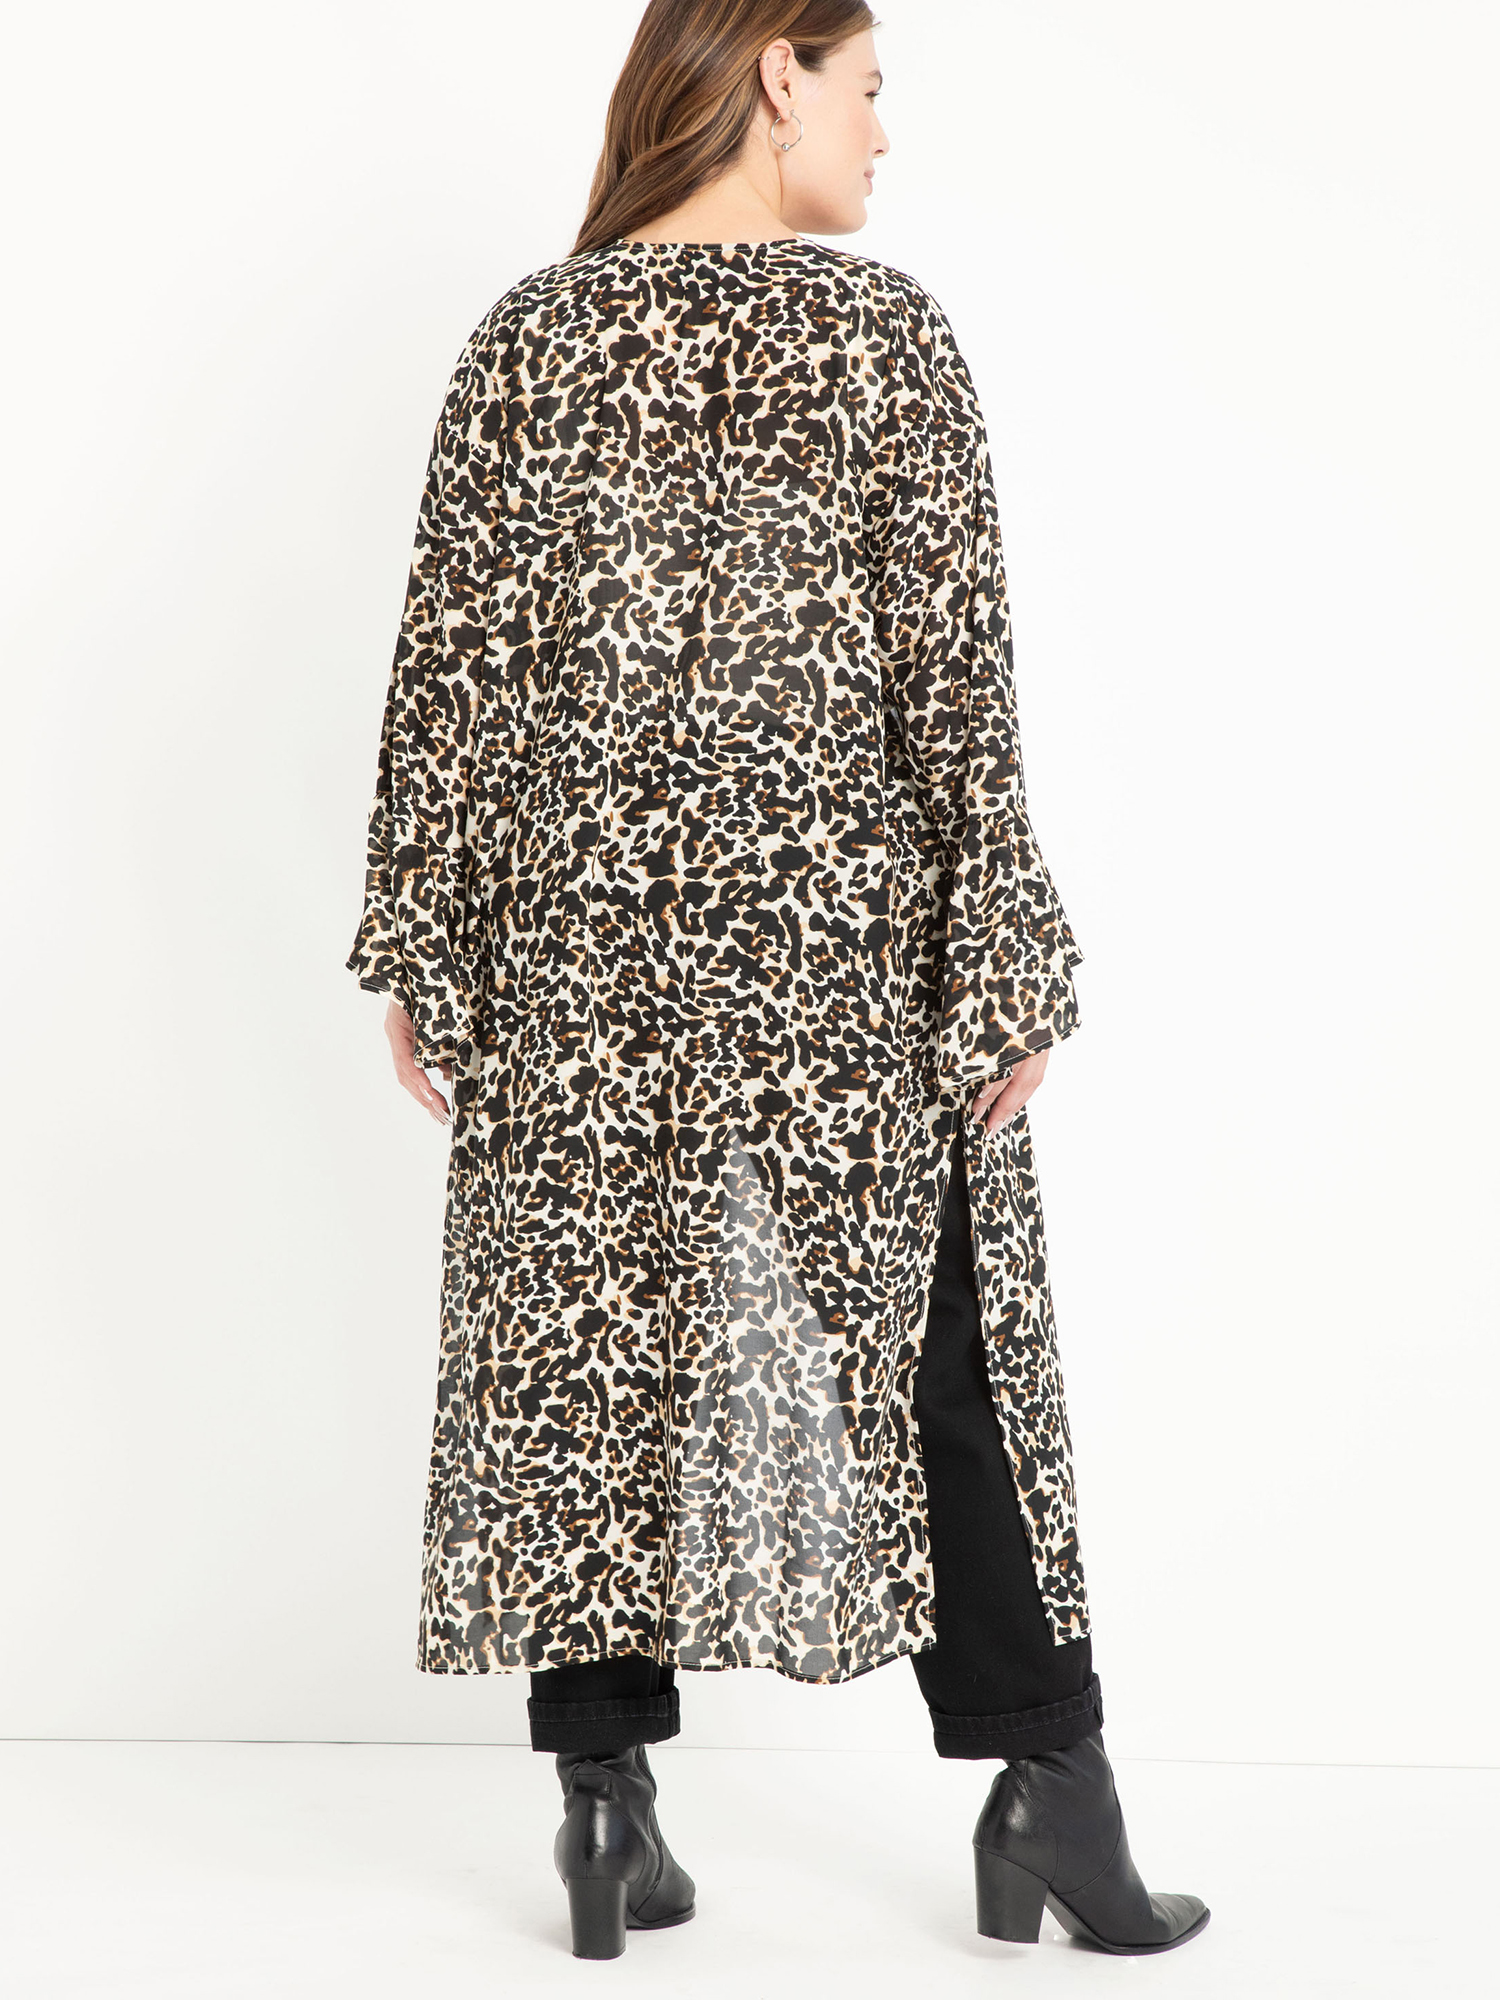 ELOQUII Elements Plus Size Leopard Print Duster with Statement Sleeves - image 2 of 4